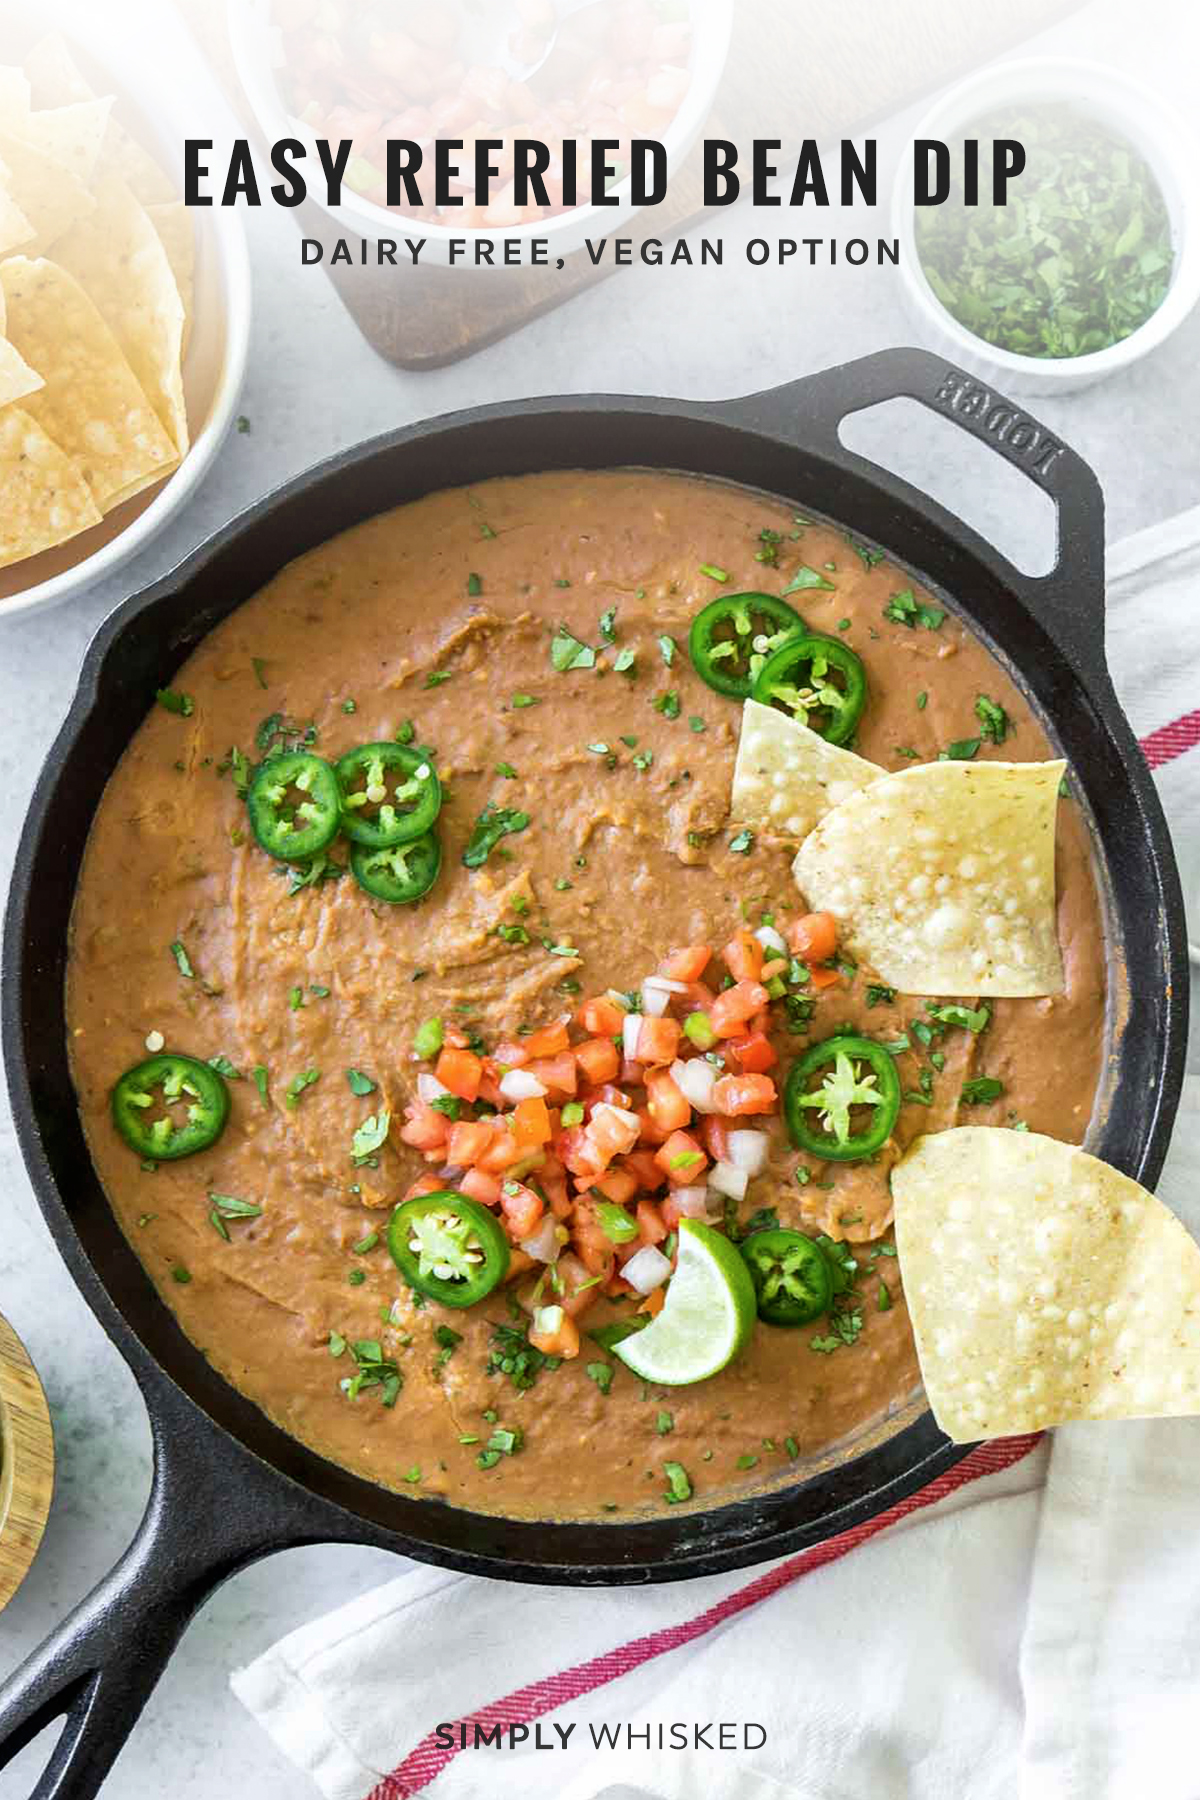 refried bean dip garnished with pico de gallo, jalapenos and salsa in a cast iron skillet, image has text overlay for Pinterest